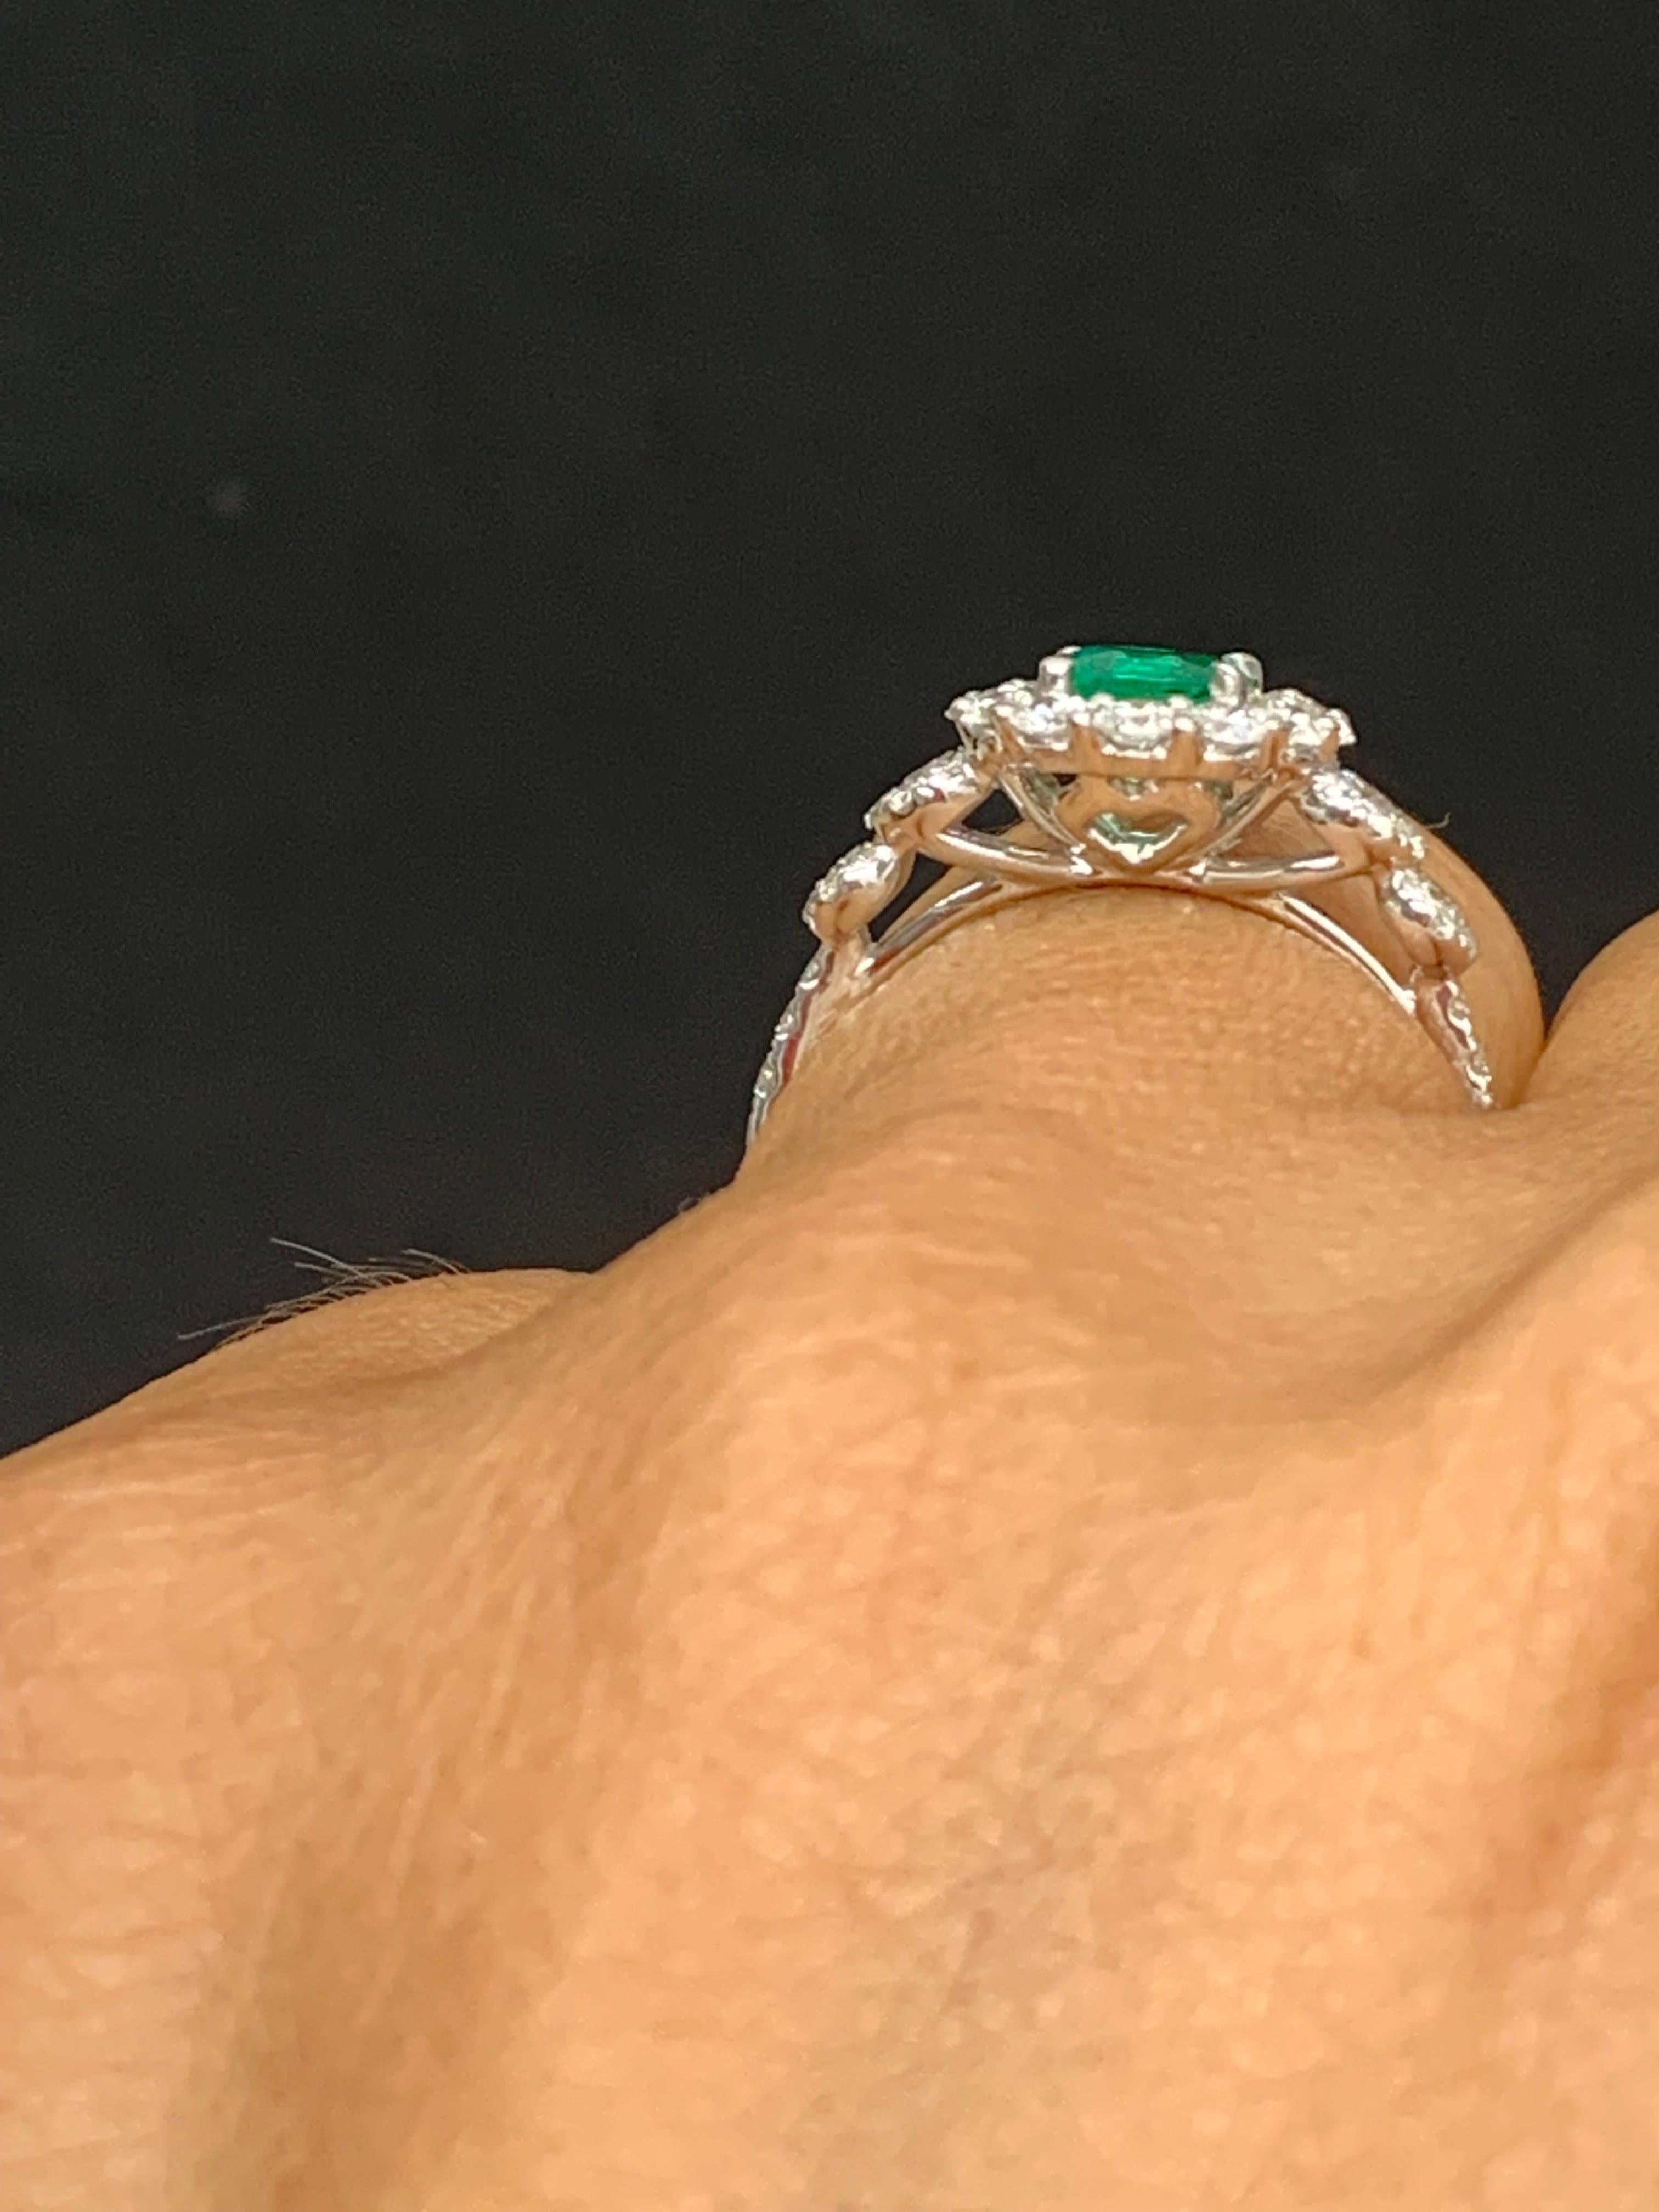 0.62 Carat Round Cut Emerald and Diamond Fashion Ring in 18k White Gold For Sale 4